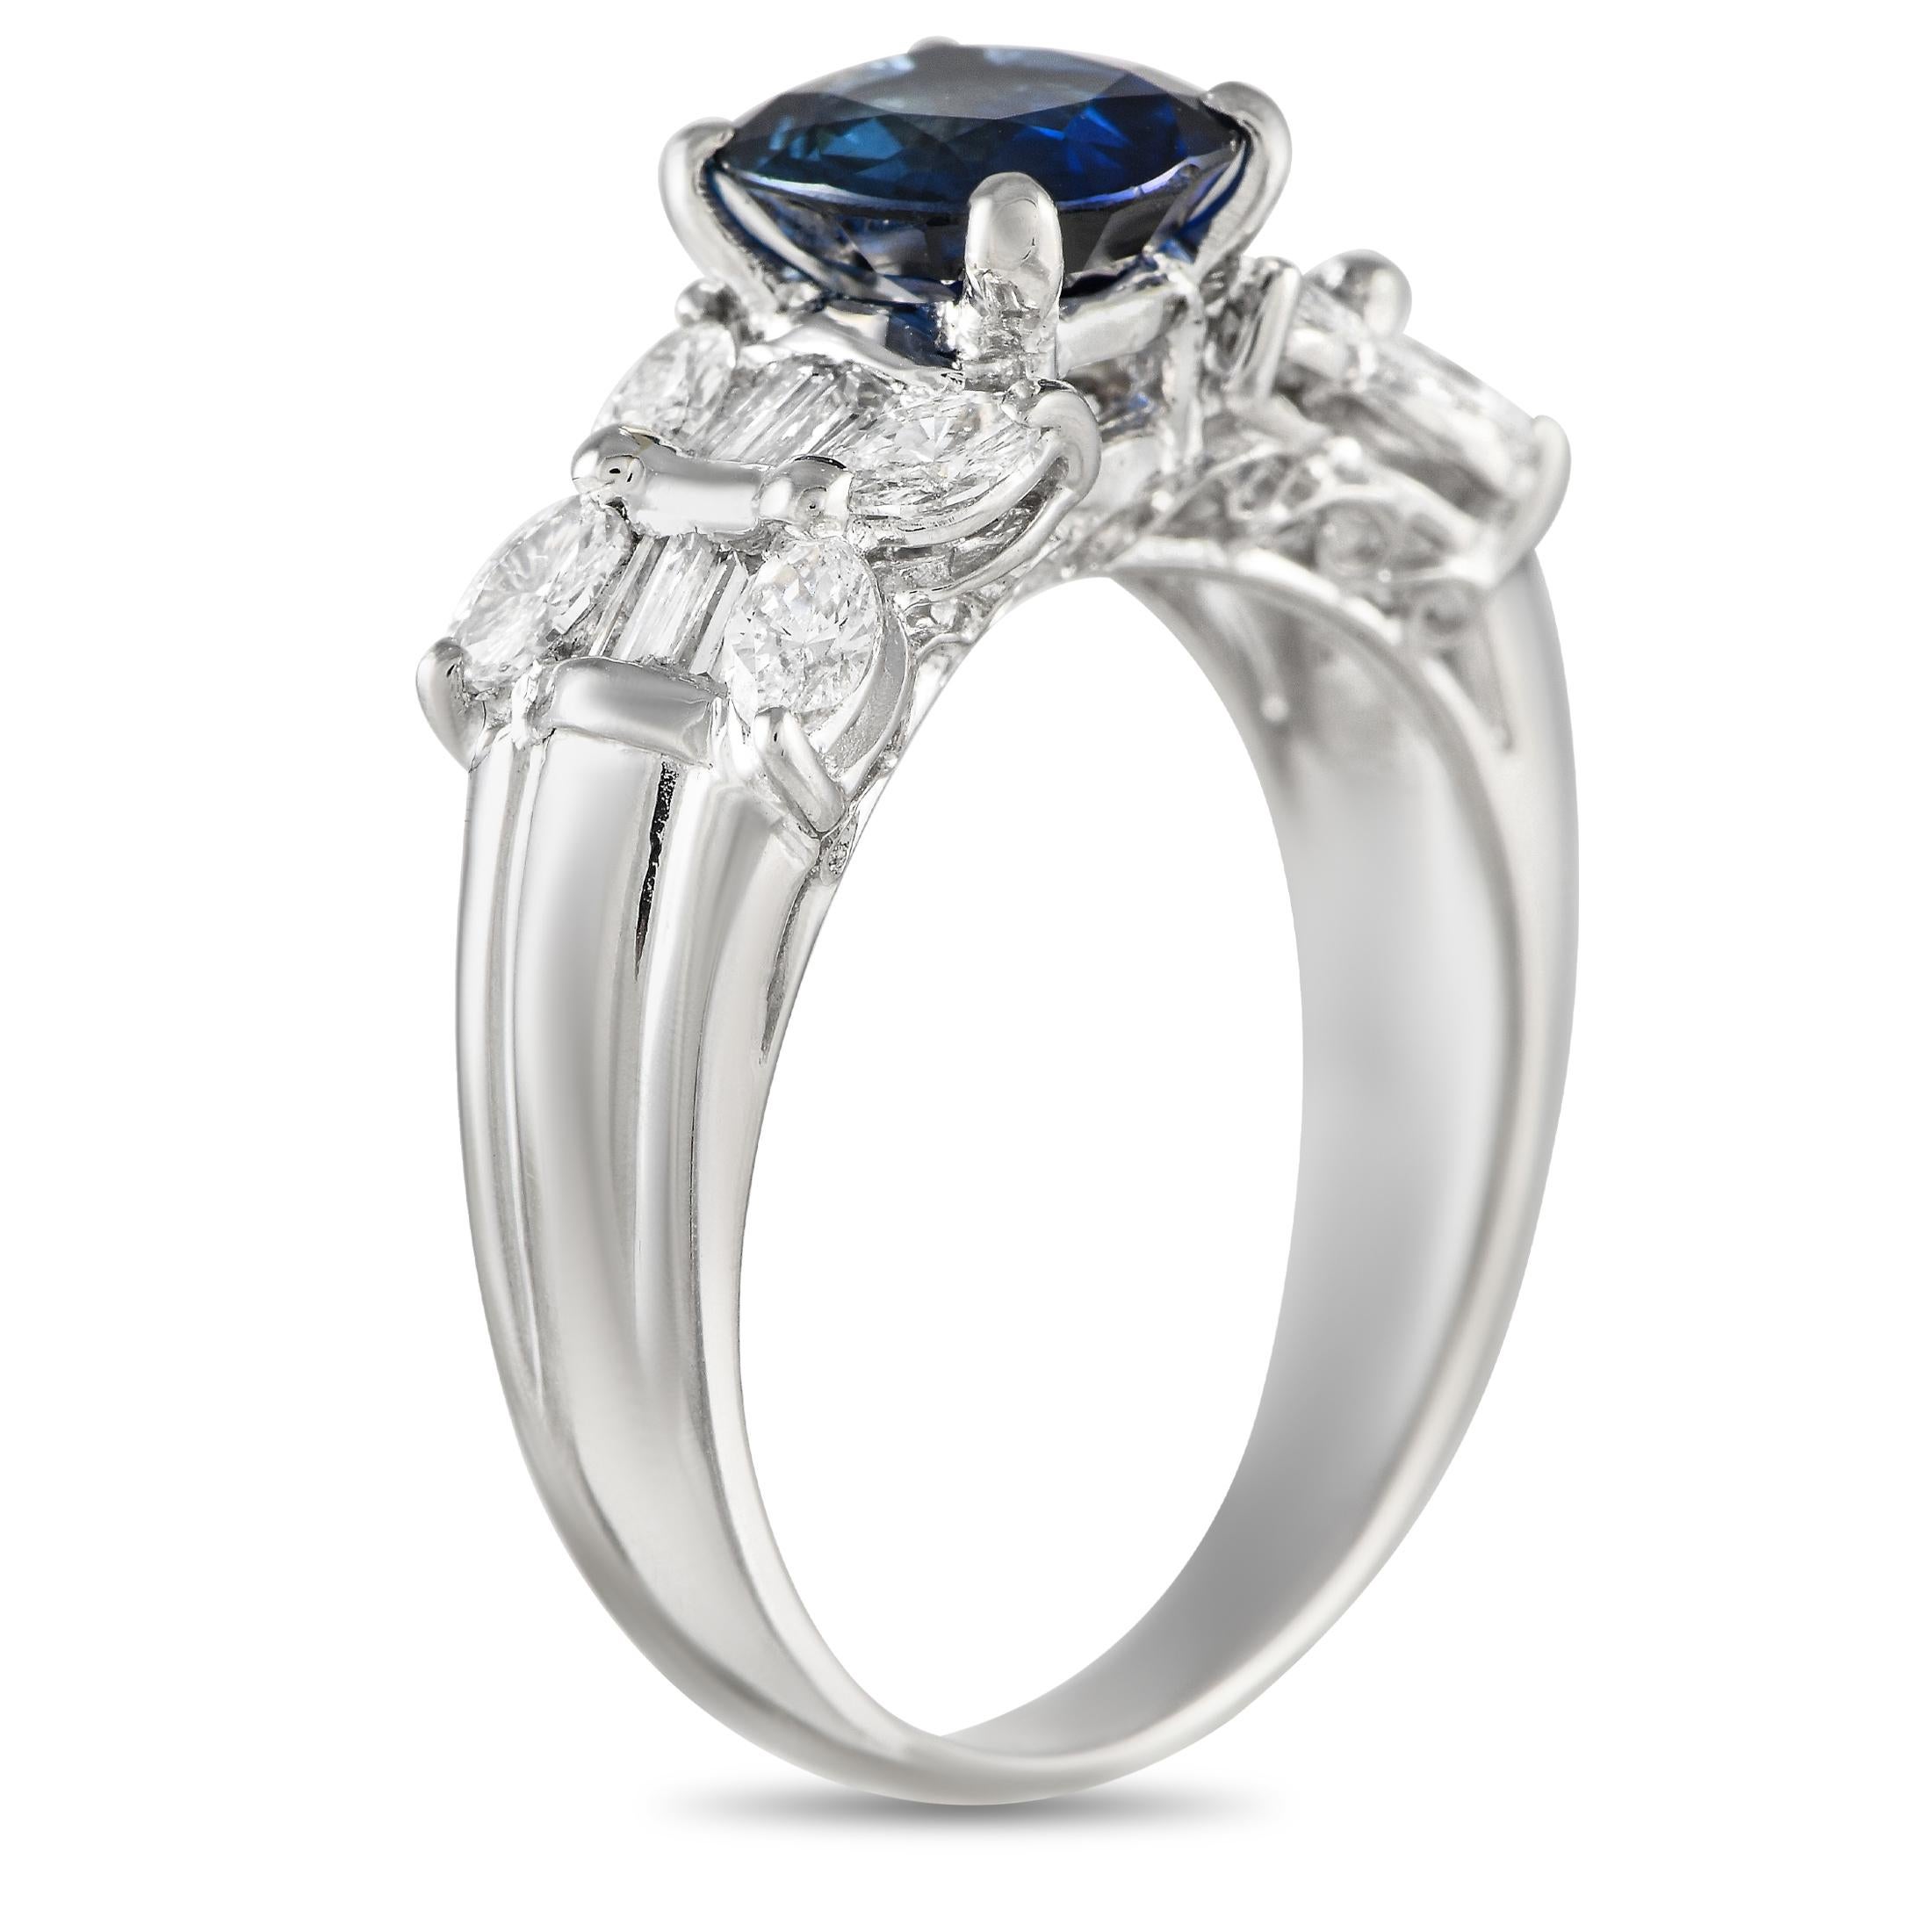 This luxurious ring will continually make a statement. Crafted from pure Platinum, this piece features a 1.69 carat Sapphire center stone surrounded by sparkling Diamonds with a total weight of 0.73 carats. It features a 4mm wide band and a top